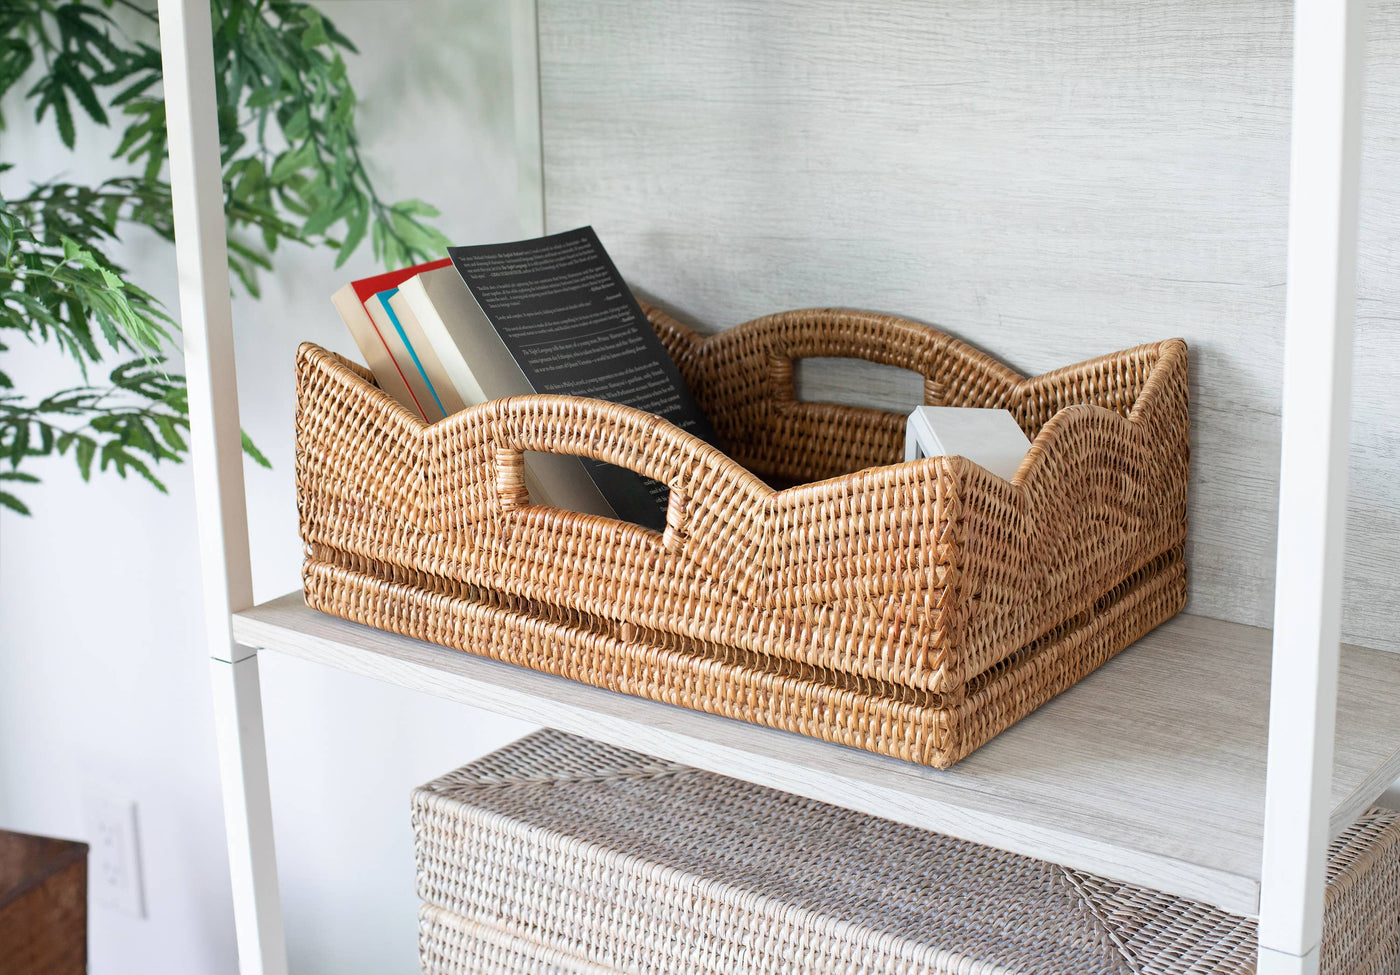 Rattan Scallop Collection Rectangle Basket